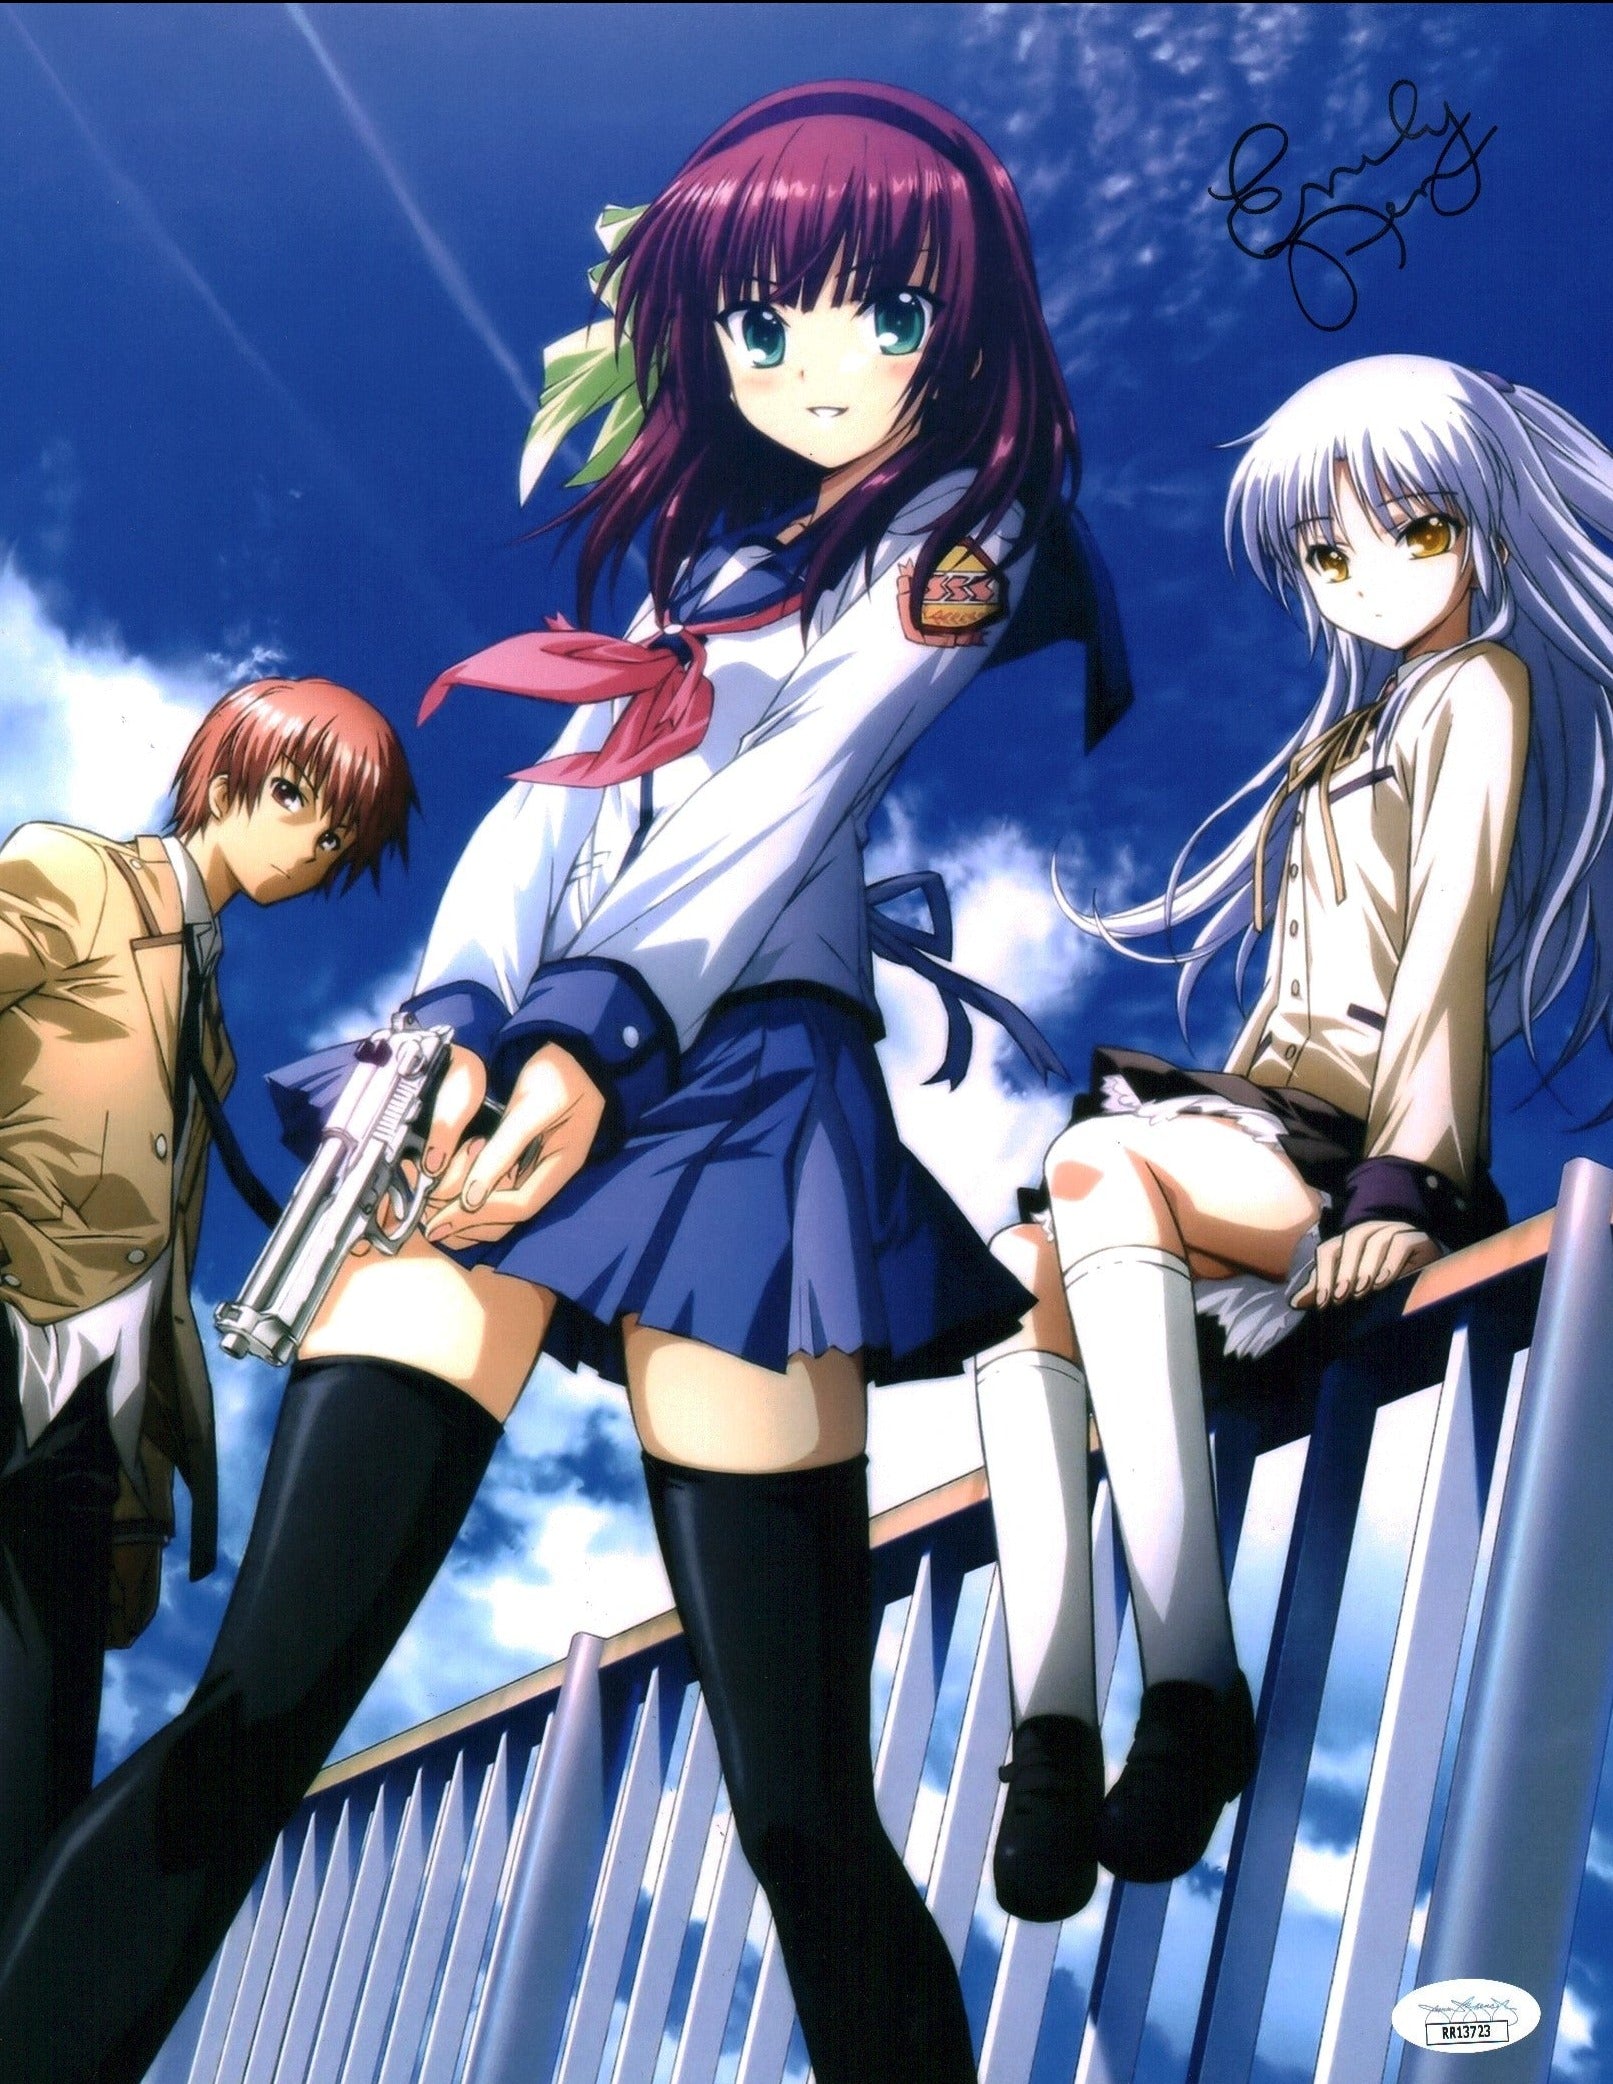 Emily Neves Angel Beats 11x14 Signed Mini Poster JSA Certified Autograph